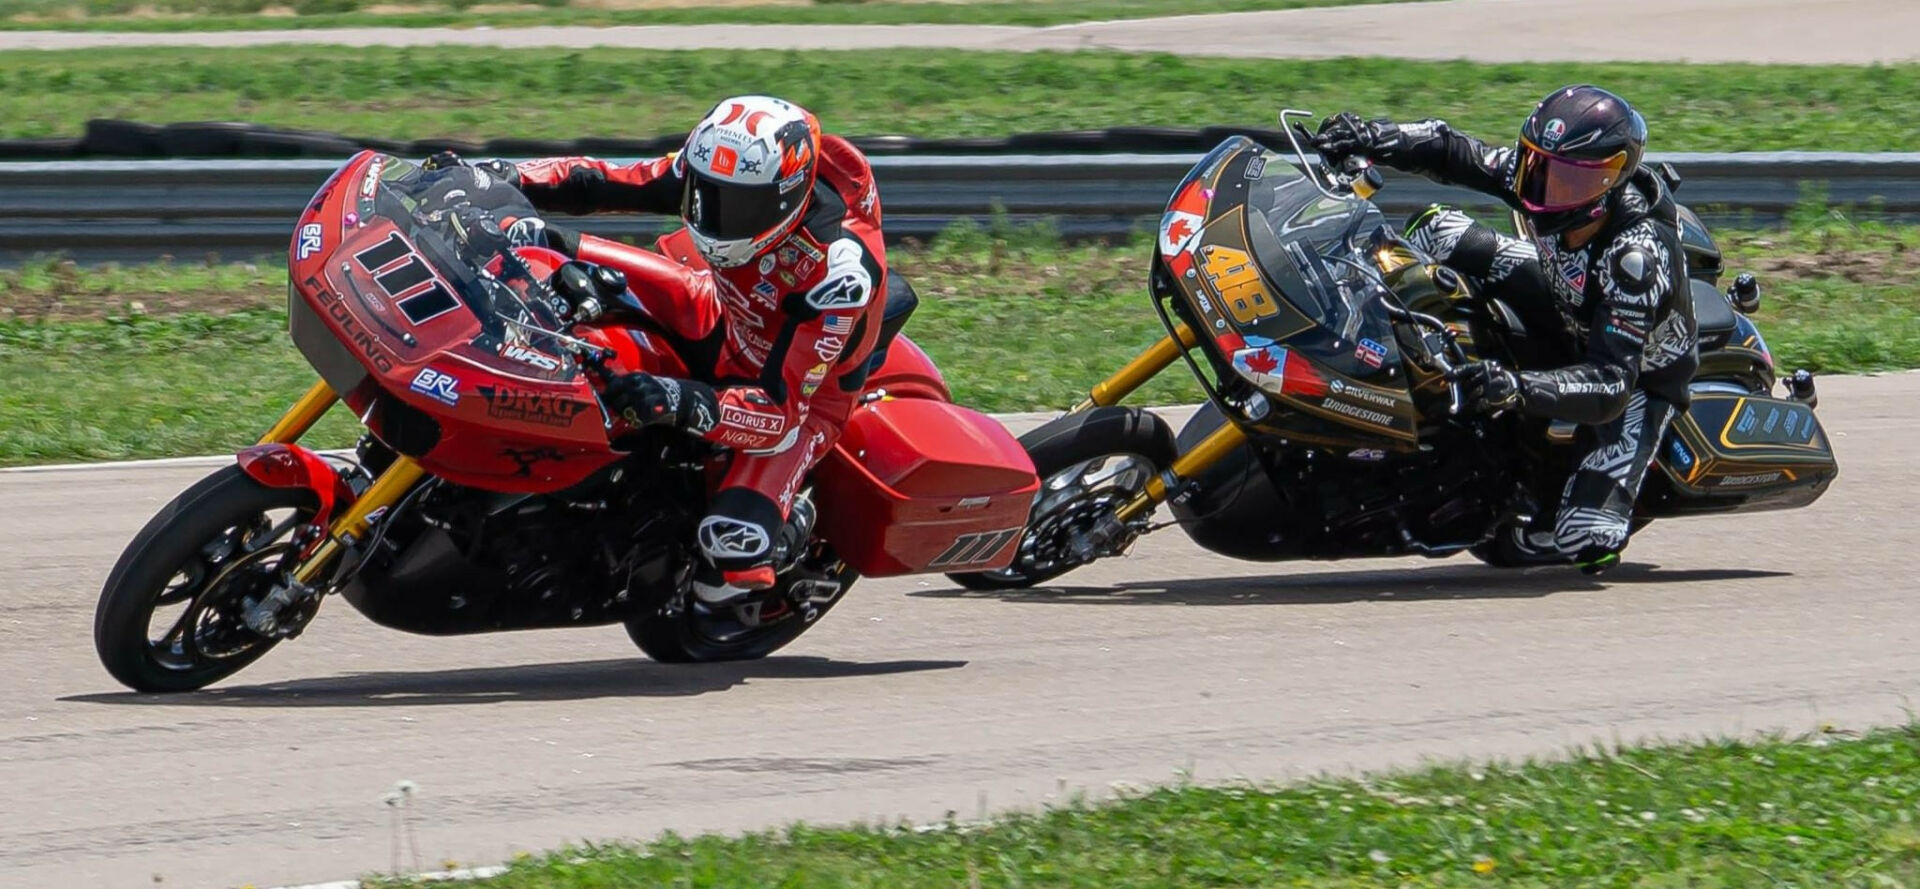 Ruben Xaus (111) leads Sam Guerin (418) in the BRL Bagger GP race at Motorsports Park Hastings. Photo by Richard Gergely, courtesy BRL.